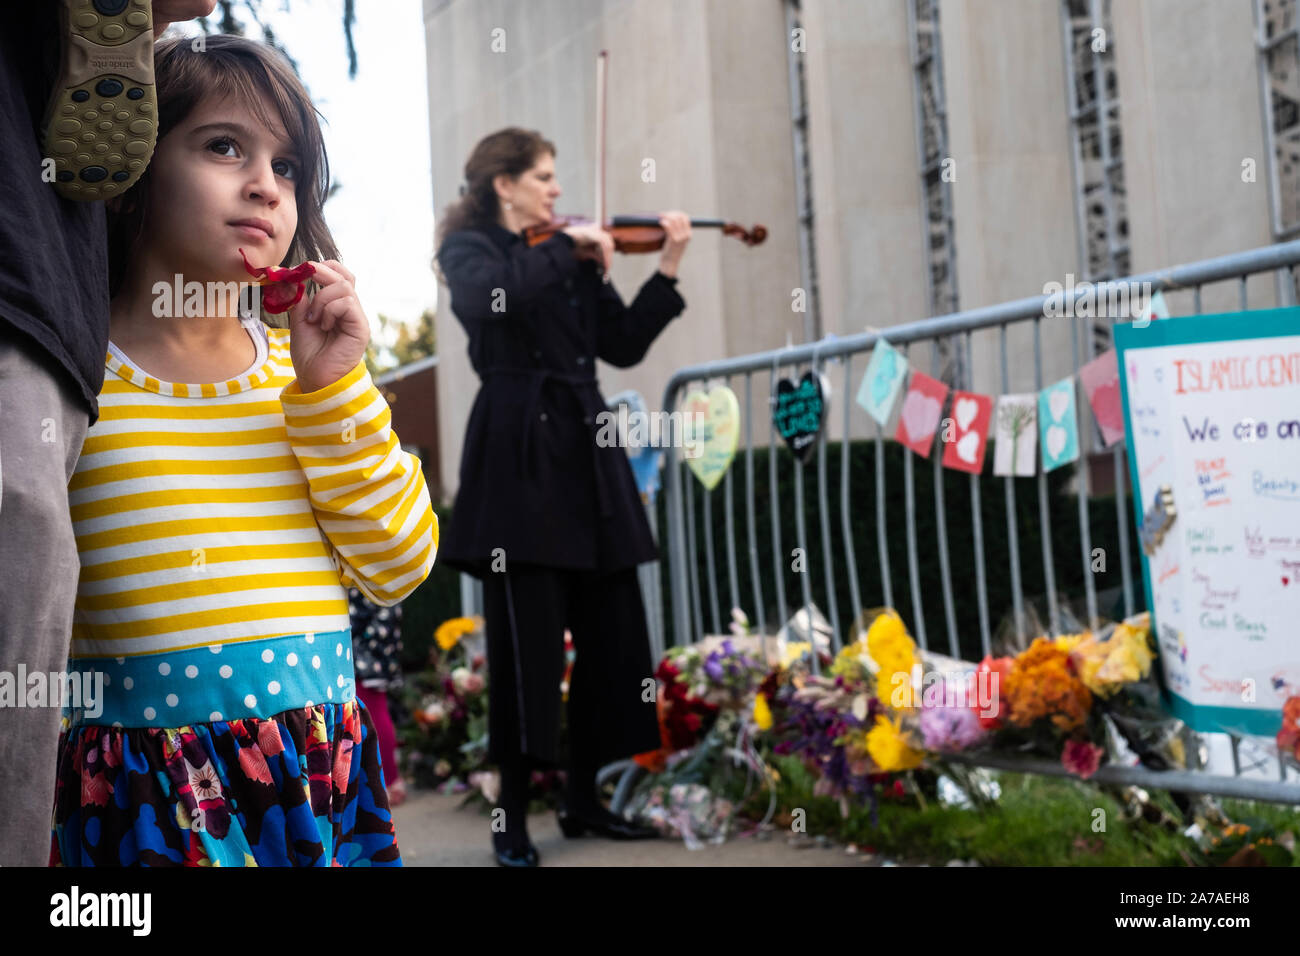 Pittsburgh, USA. 27th Oct, 2019. A girl looks on next to a woman playing a violin at memorial.One year after the shooting at the Tree of Life synagogue in Squirrel Hill, Pittsburgh, PA, many come back to the synagogue to pay their respects. Credit: Aaron Jackendoff/SOPA Images/ZUMA Wire/Alamy Live News Stock Photo